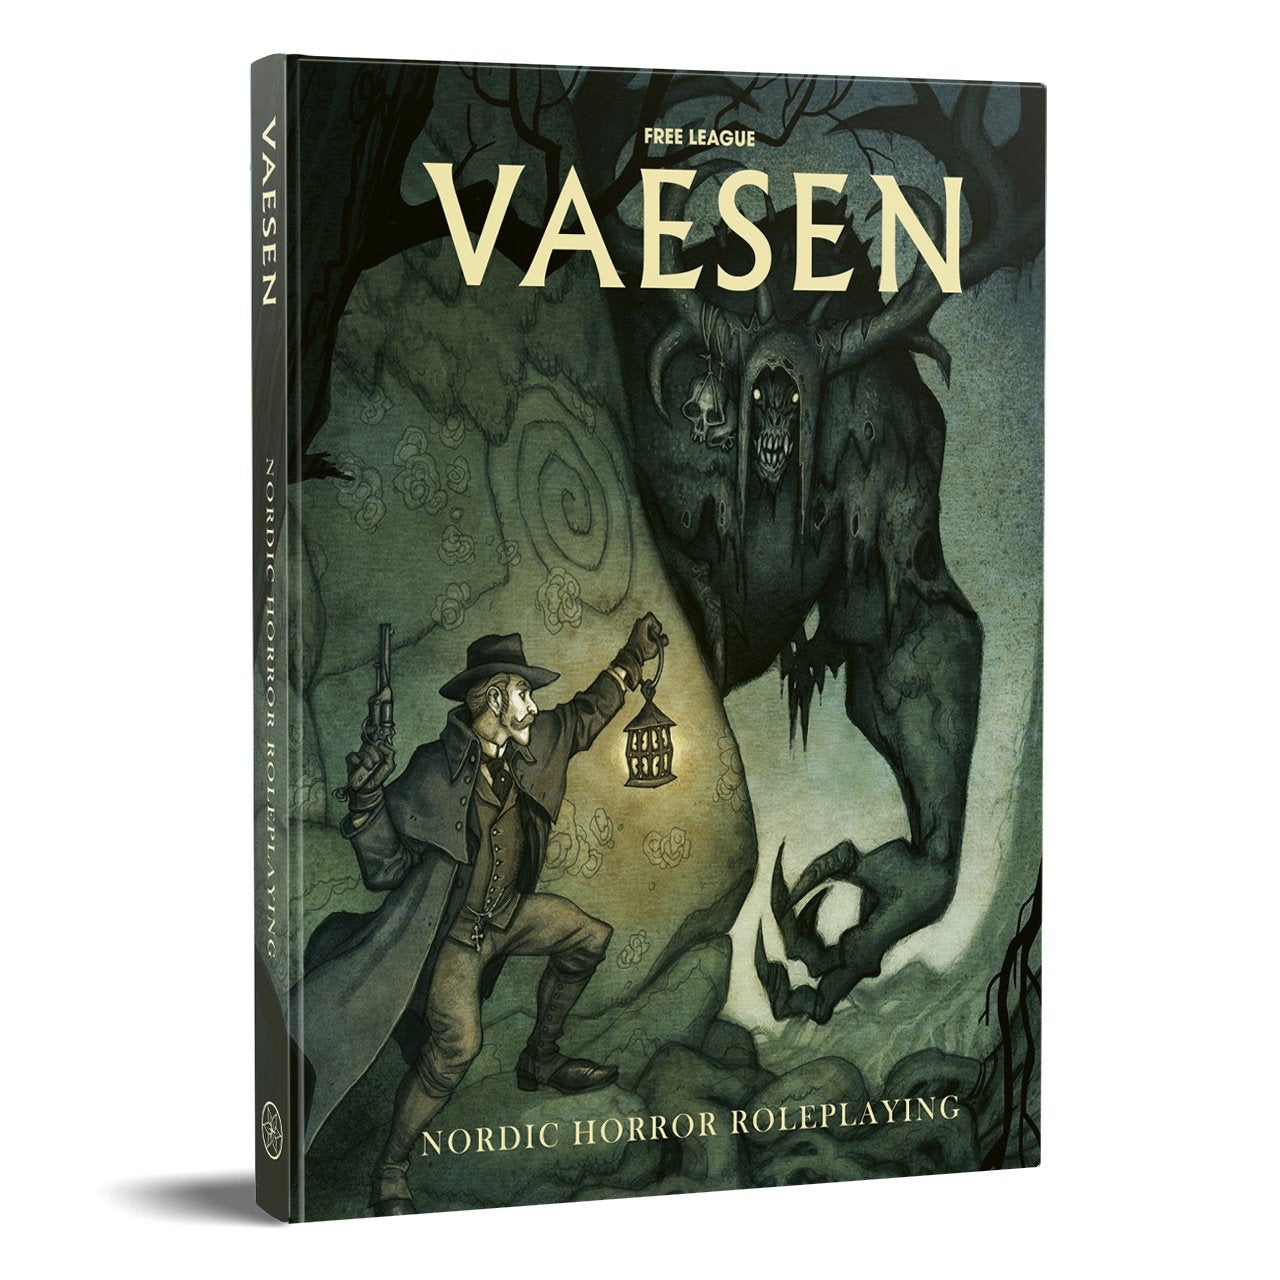 VAESEN - NORDIC HORROR ROLEPLAYING (SIGNED COPY)